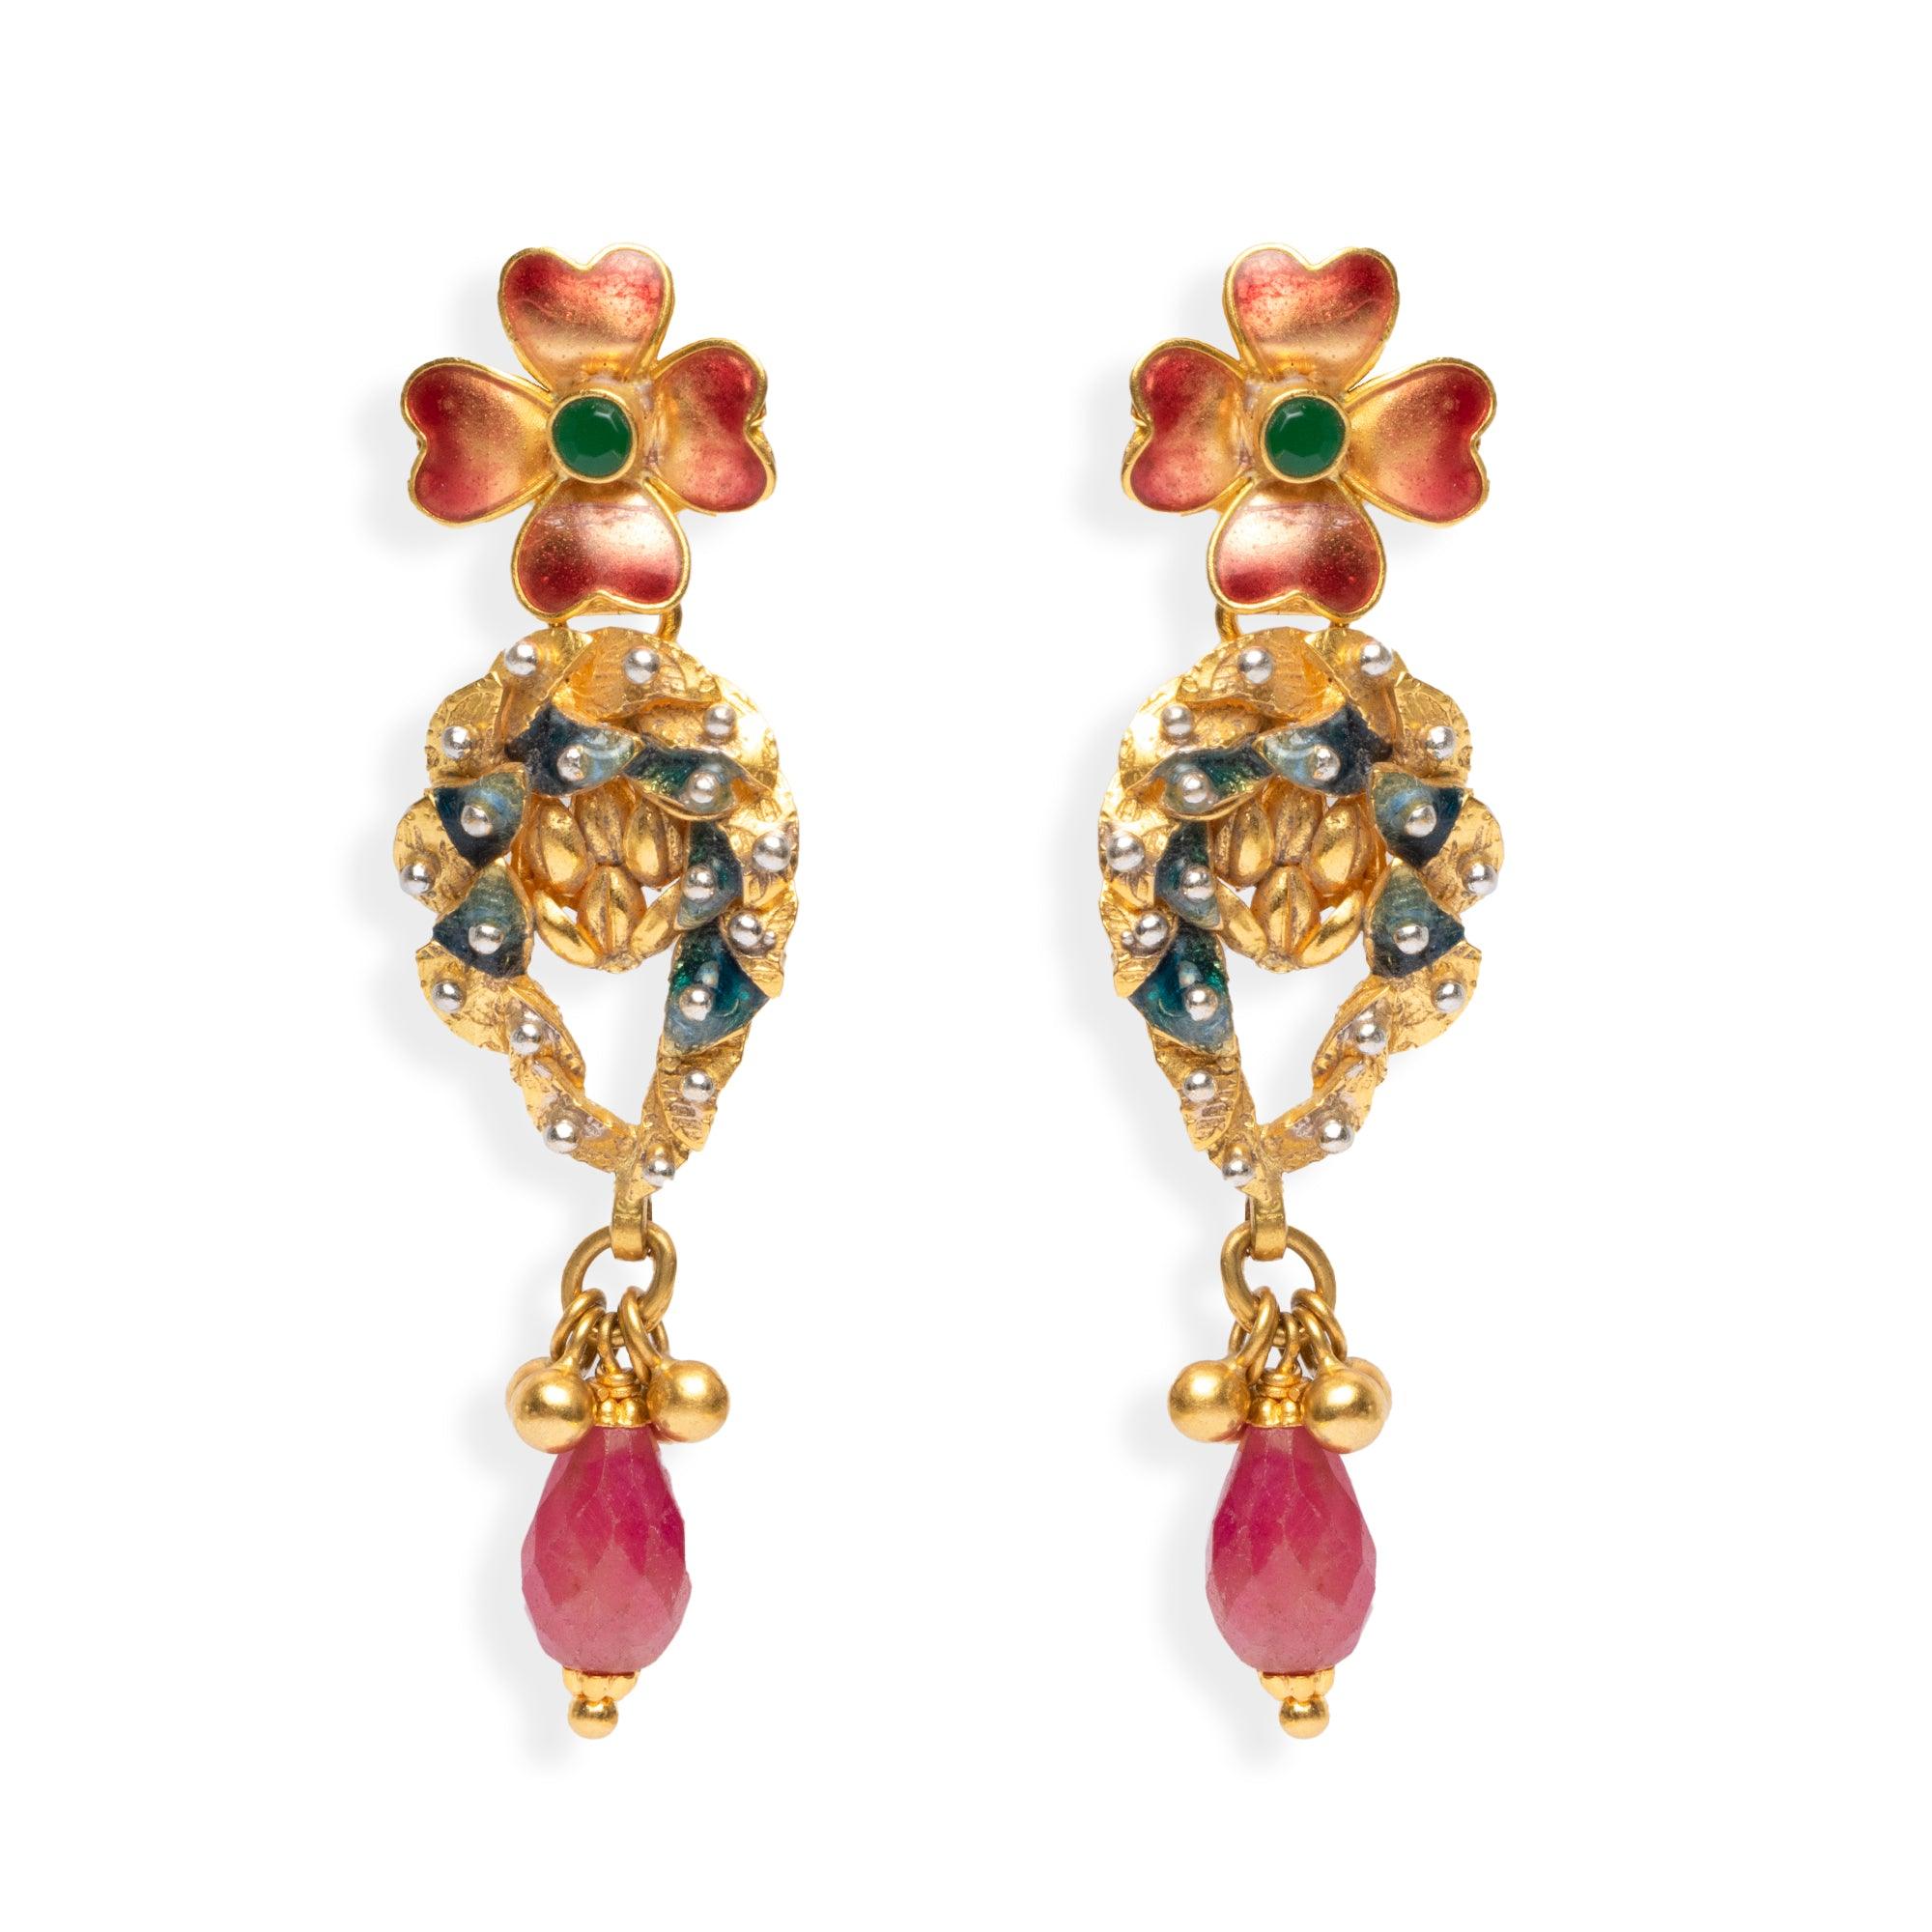 22ct Gold Enamel and Cubic Zirconia Drop Earrings with Flower Design (10.4g) E-3350 - Minar Jewellers